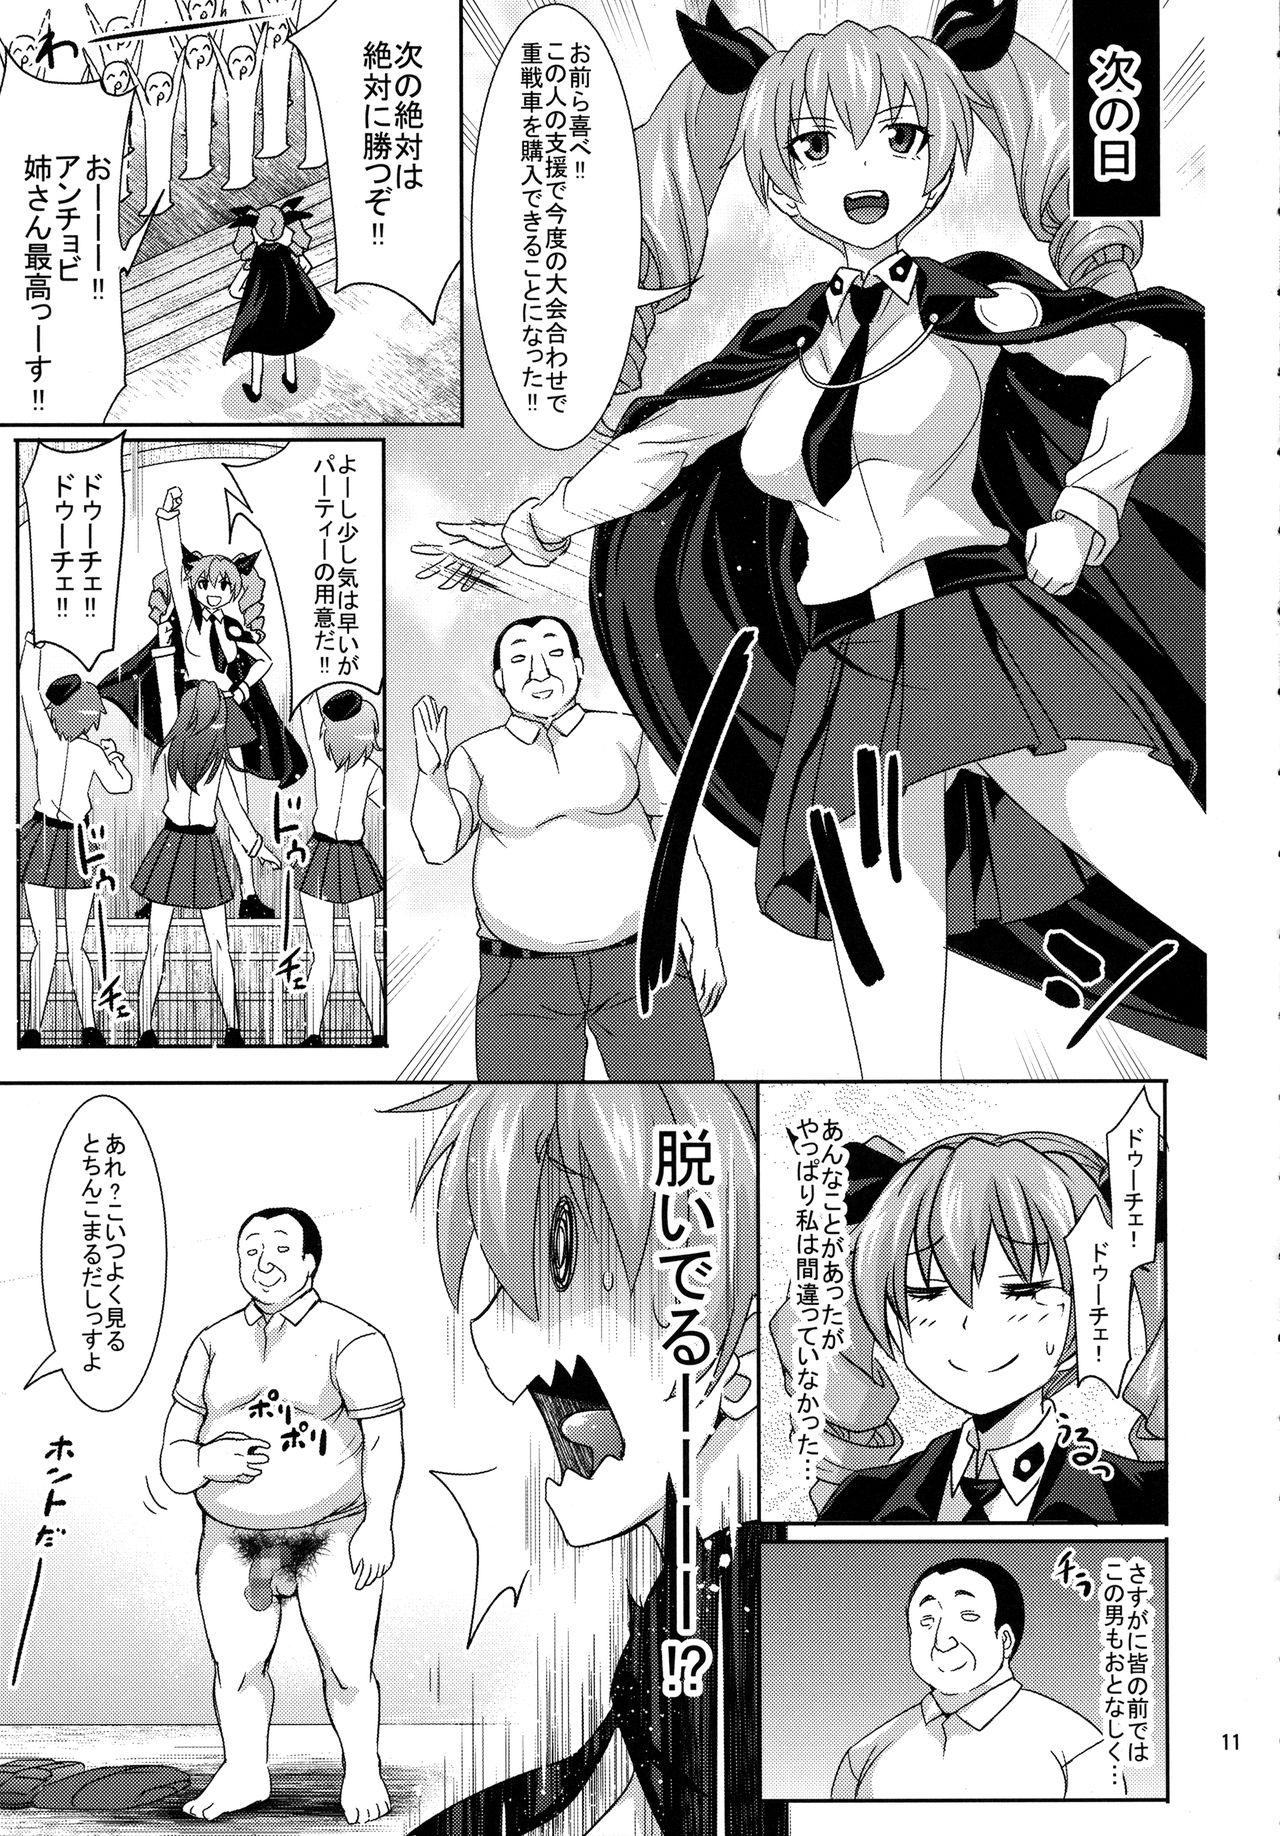 Club Anchovy to Duce! Duce! - Girls und panzer Perfect Tits - Page 10